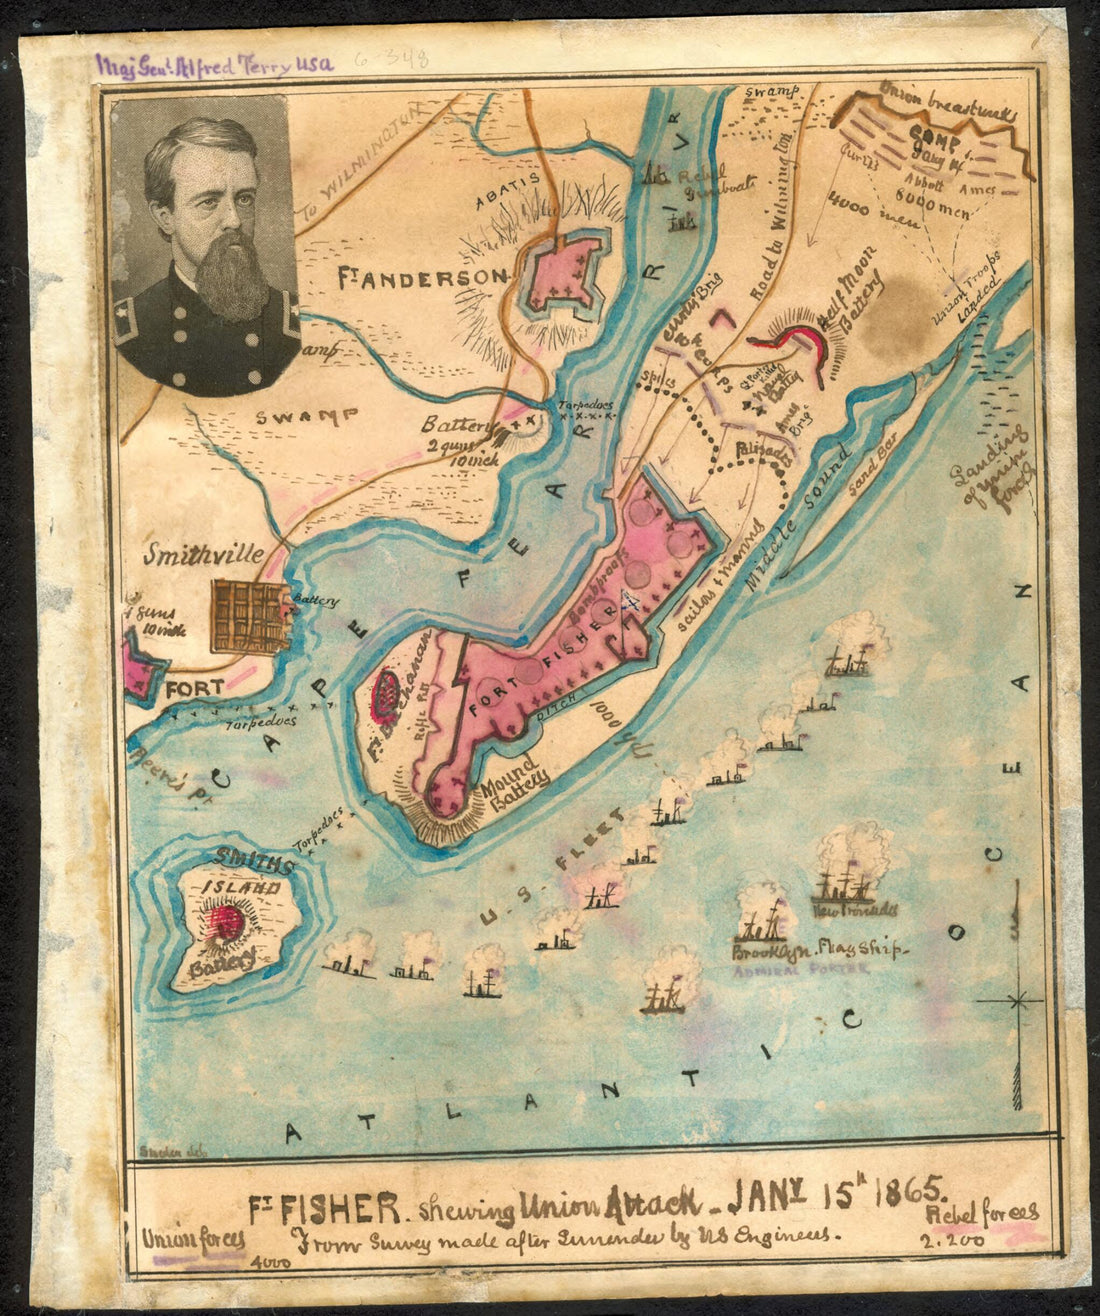 This old map of Ft. Fisher Shewing sic Union Attack, Jany 15th 1865 from Survey Made After Surrender by U.S. Engineers from 01-15 was created by Robert Knox Sneden in 01-15